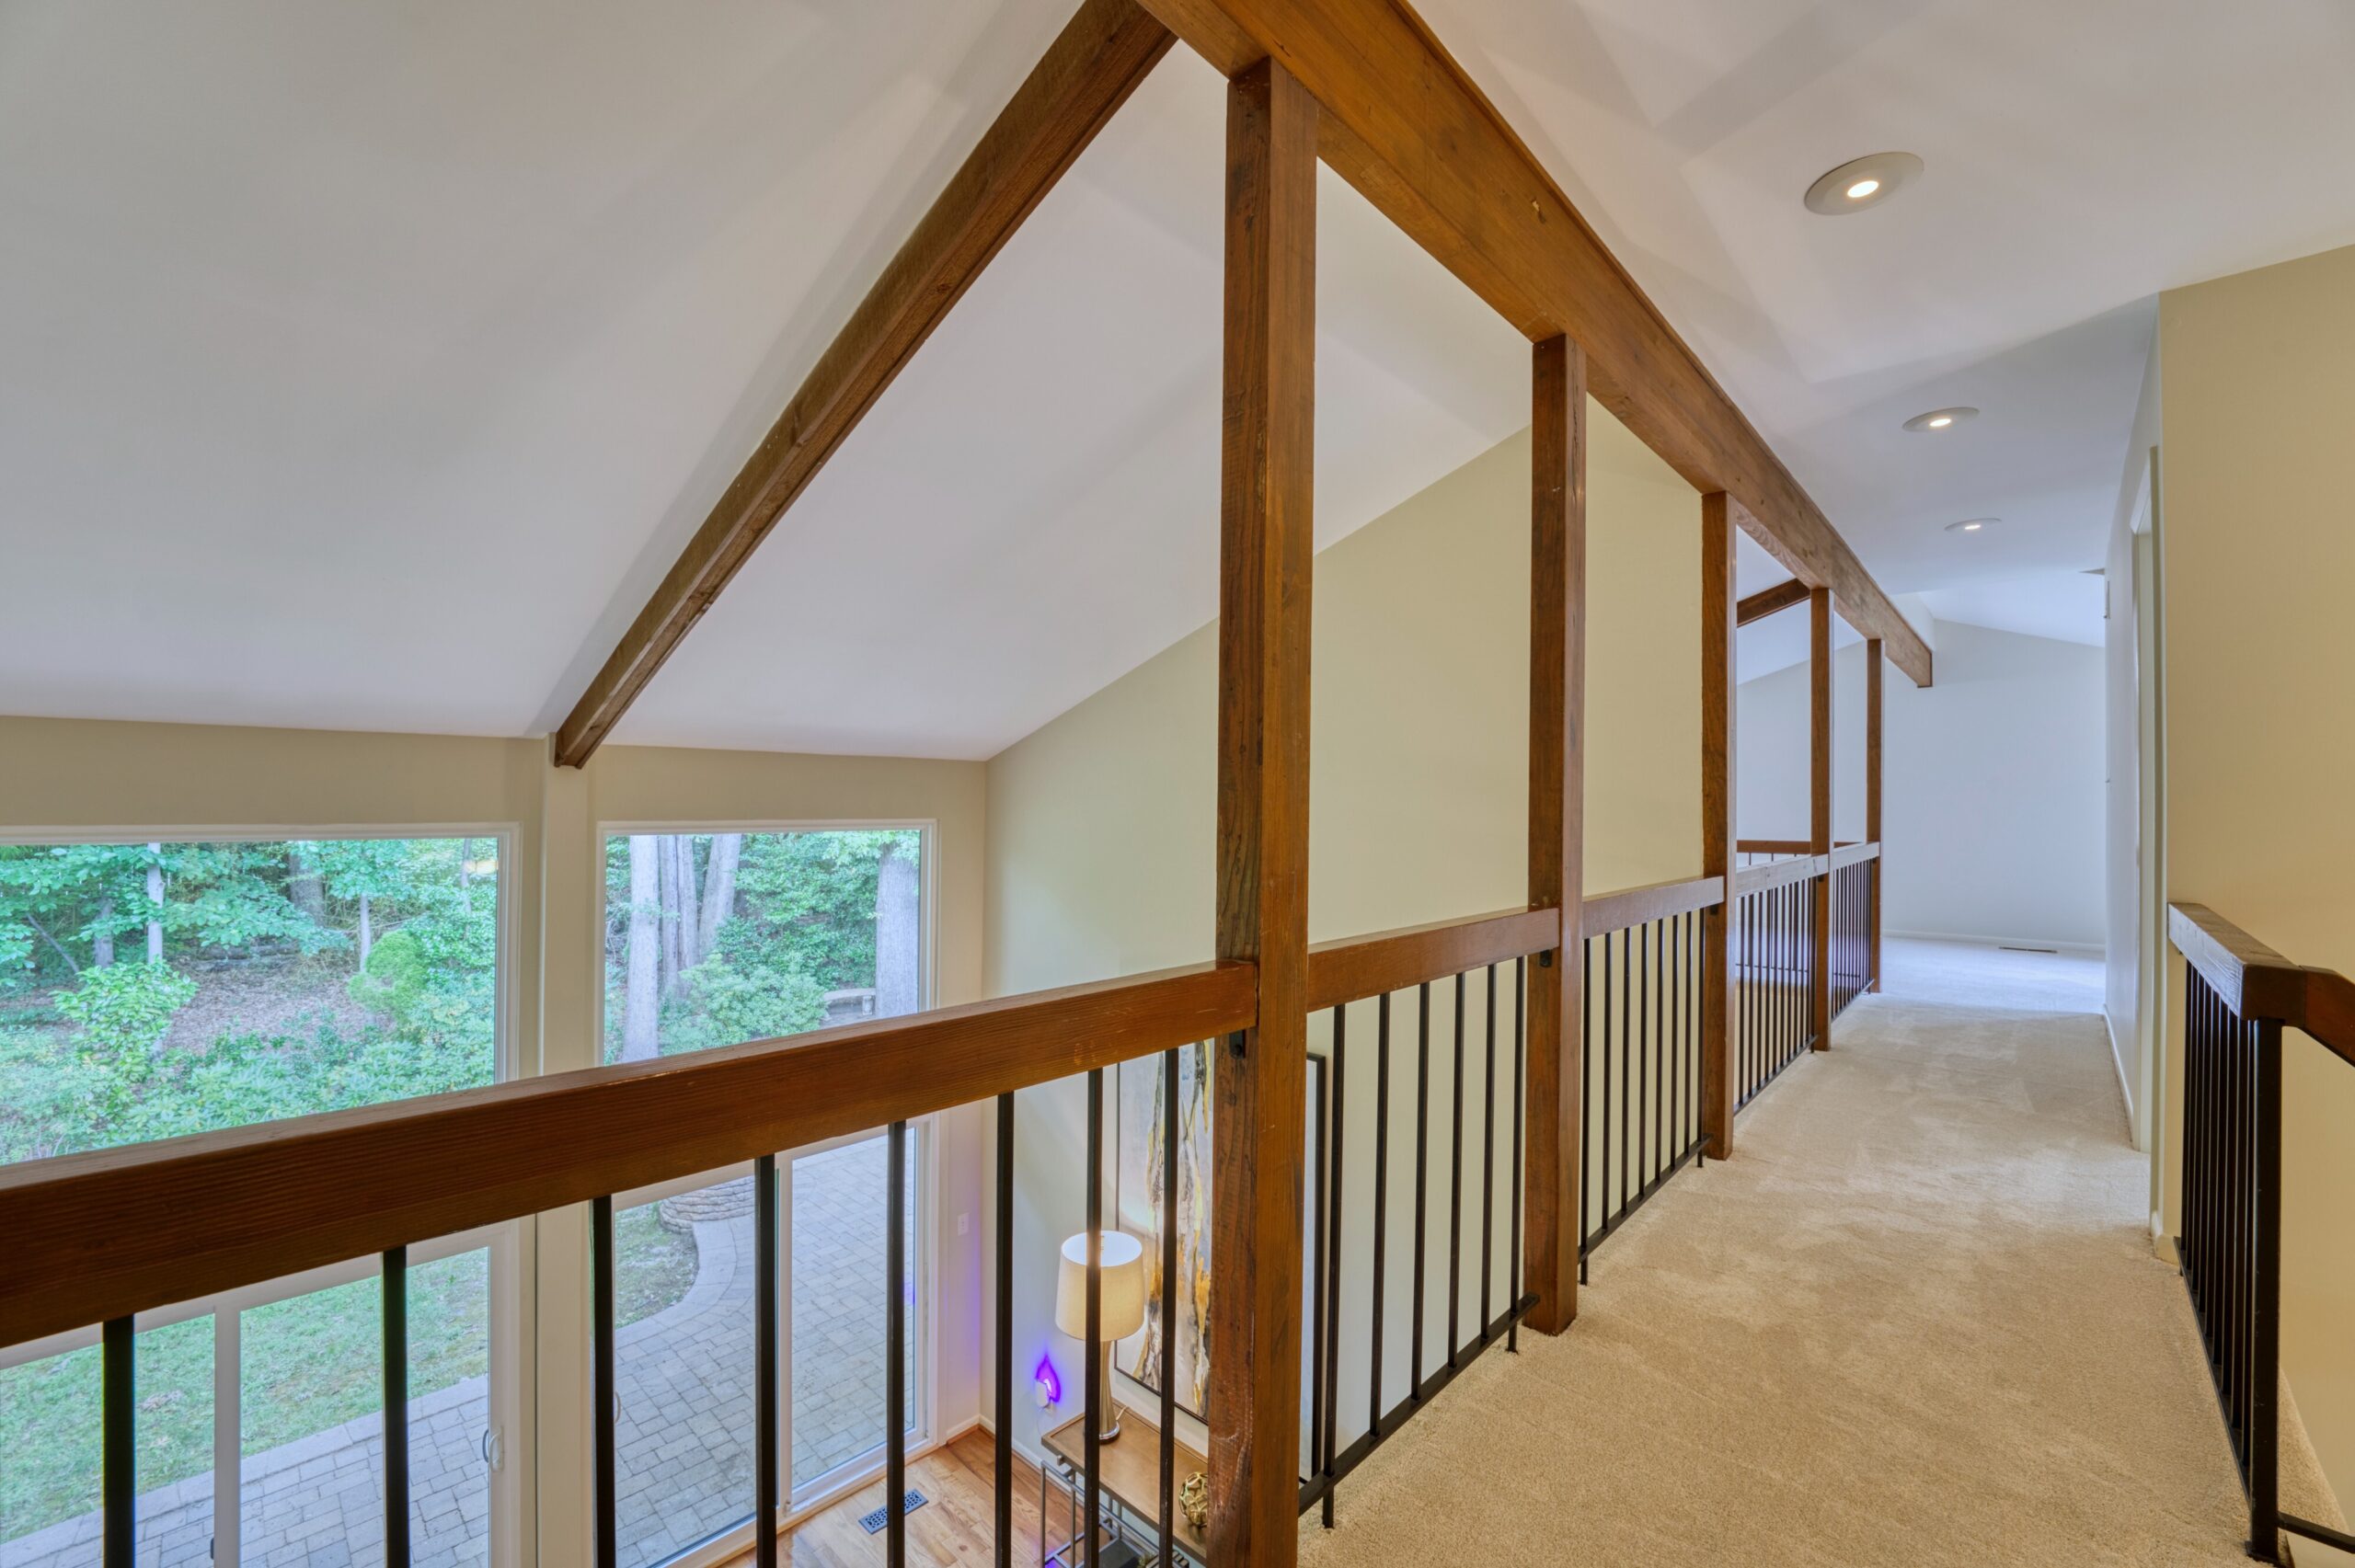 Professional interior photo of 5222 Bradfield Dr in Burke, Virginia - showing the upstairs walkway with wooden rails and ceiling beams looking toward the loft at the end